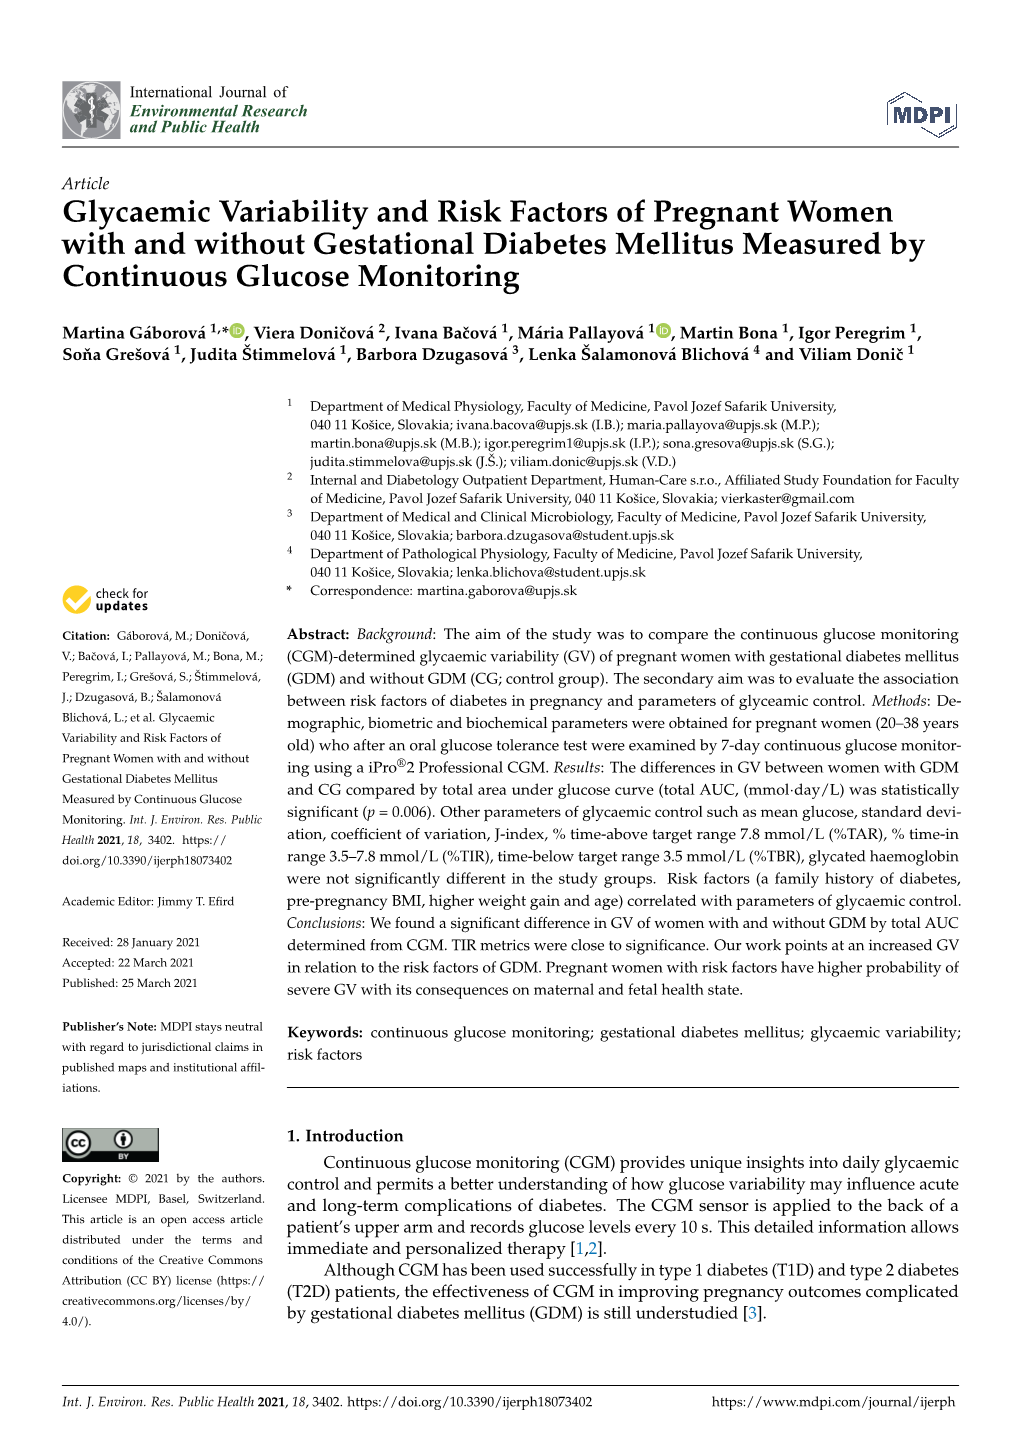 Glycaemic Variability and Risk Factors of Pregnant Women with and Without Gestational Diabetes Mellitus Measured by Continuous Glucose Monitoring